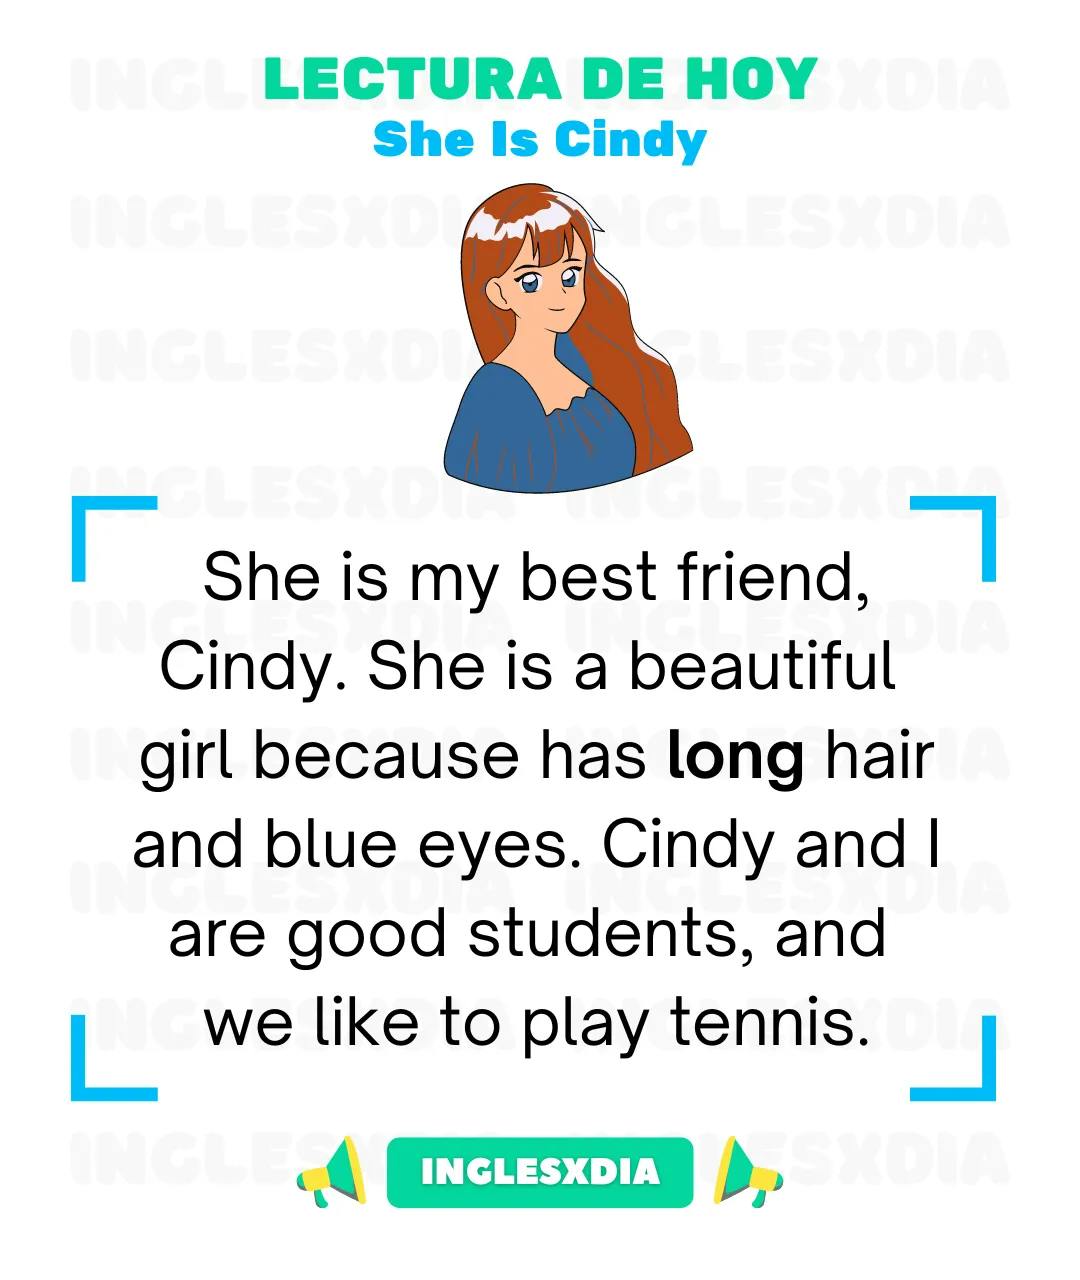 She Is Cindy